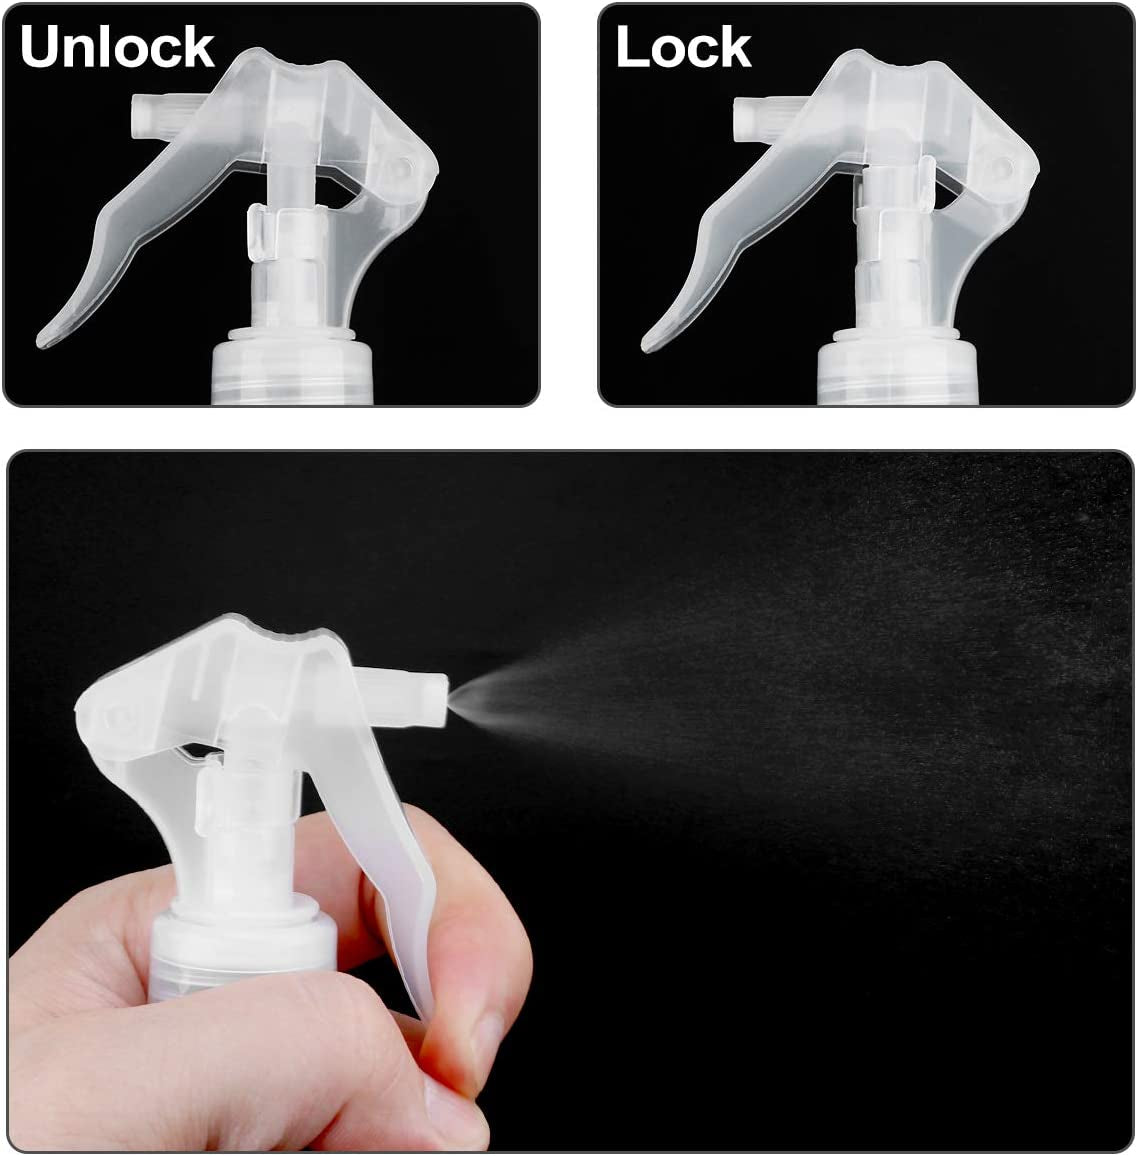 200Ml Water Spray Bottles Misting Clear Hair Sprayer Empty Water Alcohol Bottle for Travel Beauty Cleaning Gardening (2PCS)